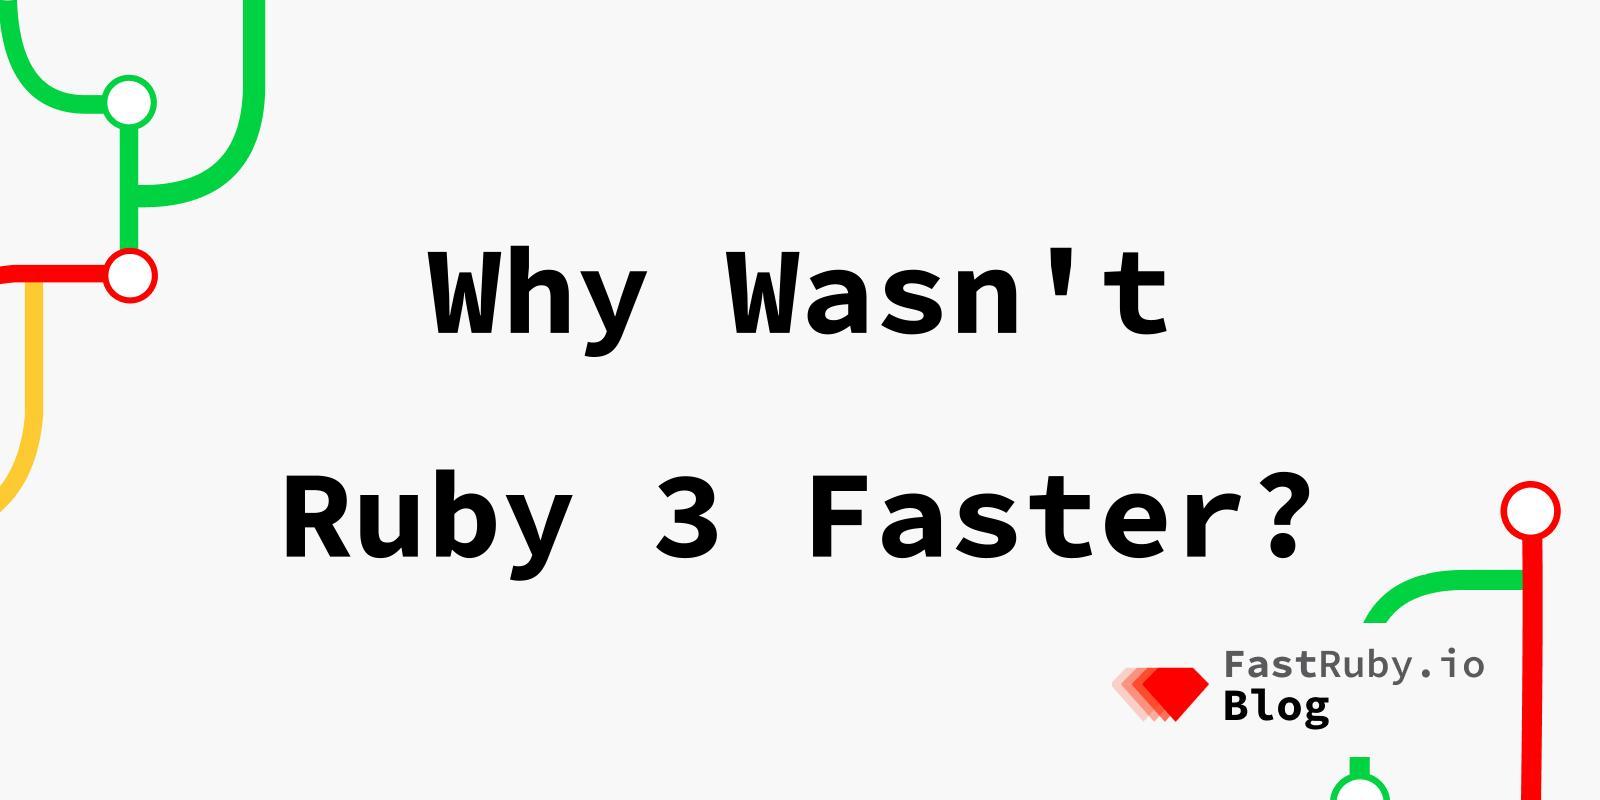 Why Wasn't Ruby 3 Faster?